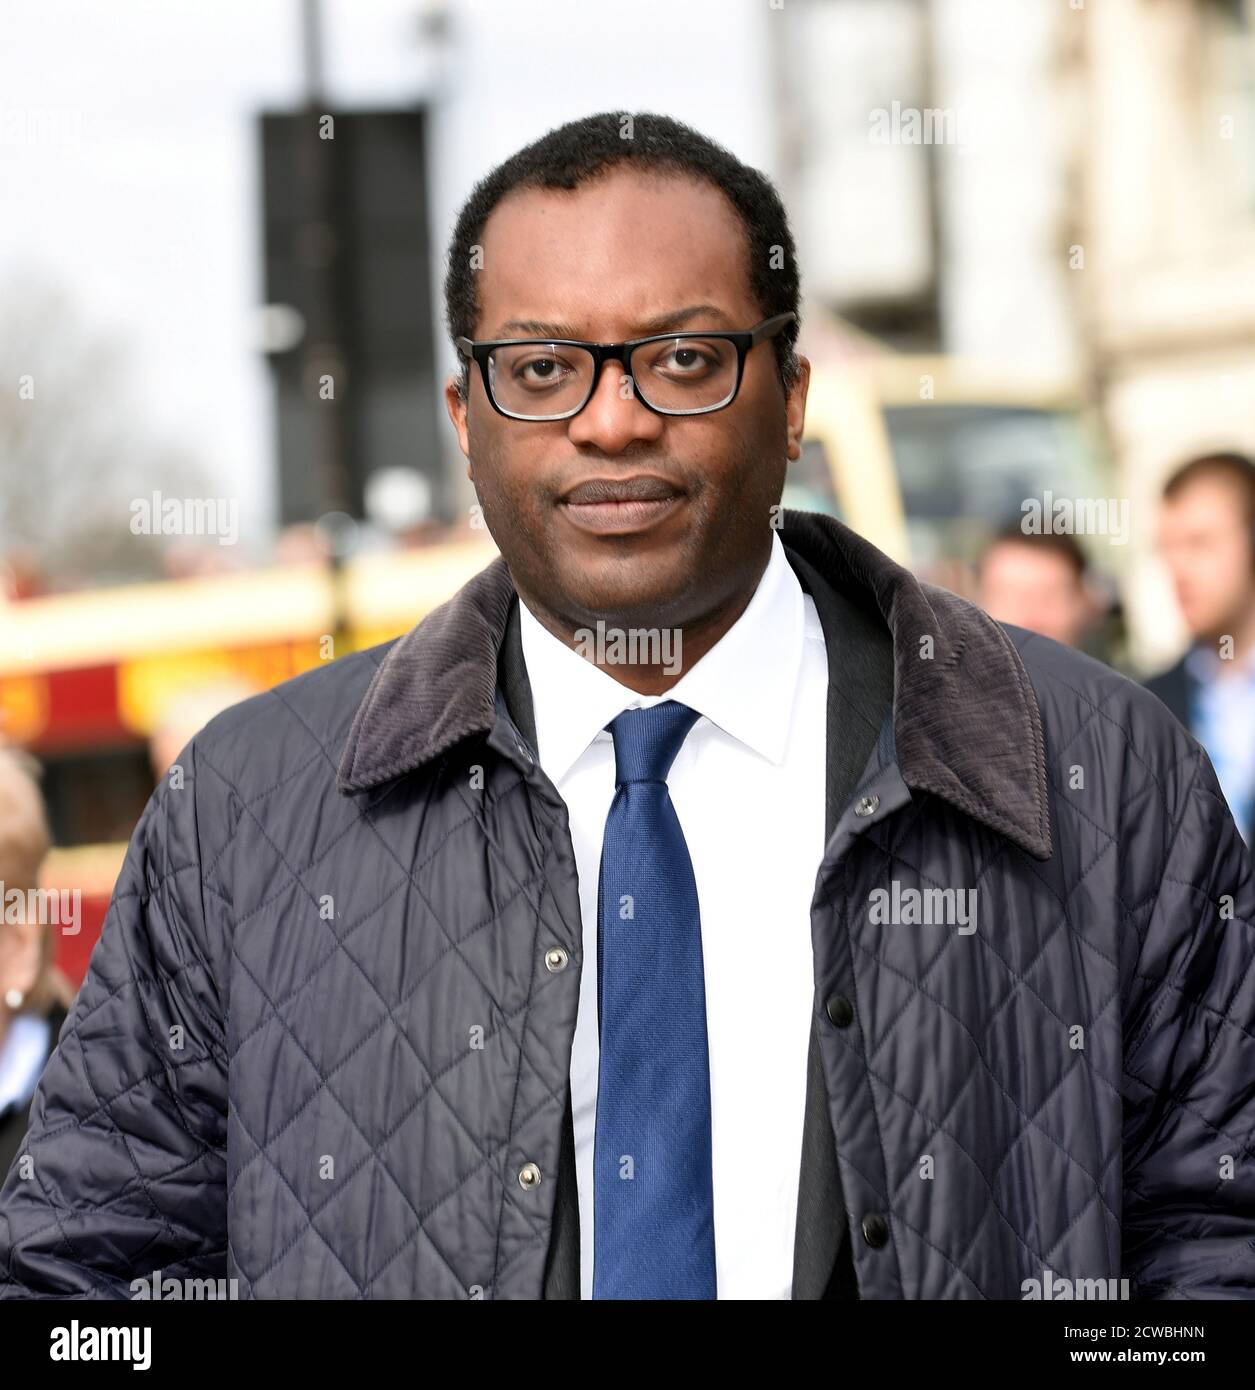 Photograph of Kwasi Kwarteng. Kwasi Alfred Addo Kwarteng (1975-) a British Conservative Party politician serving as Member of Parliament for Spelthorne since 2010. On 16 November 2018, Kwarteng was appointed Under-Secretary of State at the Department for Exiting the European Union, following the resignation of Suella Braverman Stock Photo